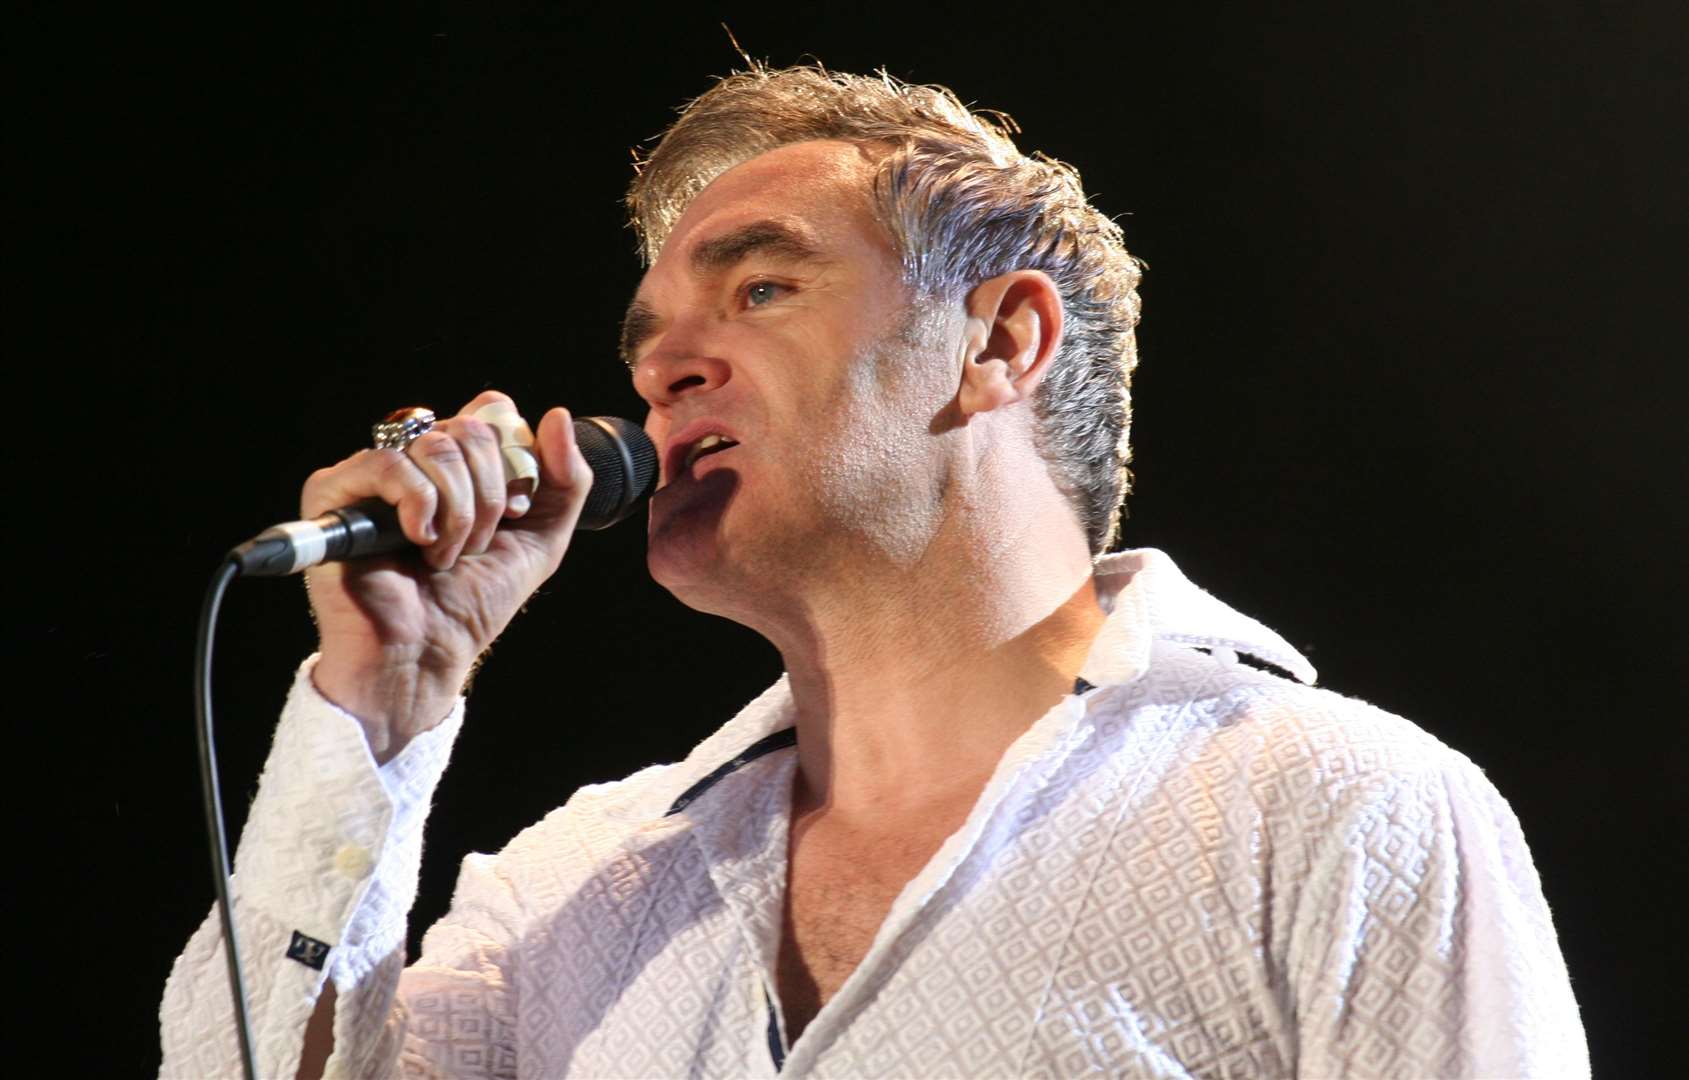 Morrissey performing at the Hop Farm in 2011. Stock image by Linda Cox